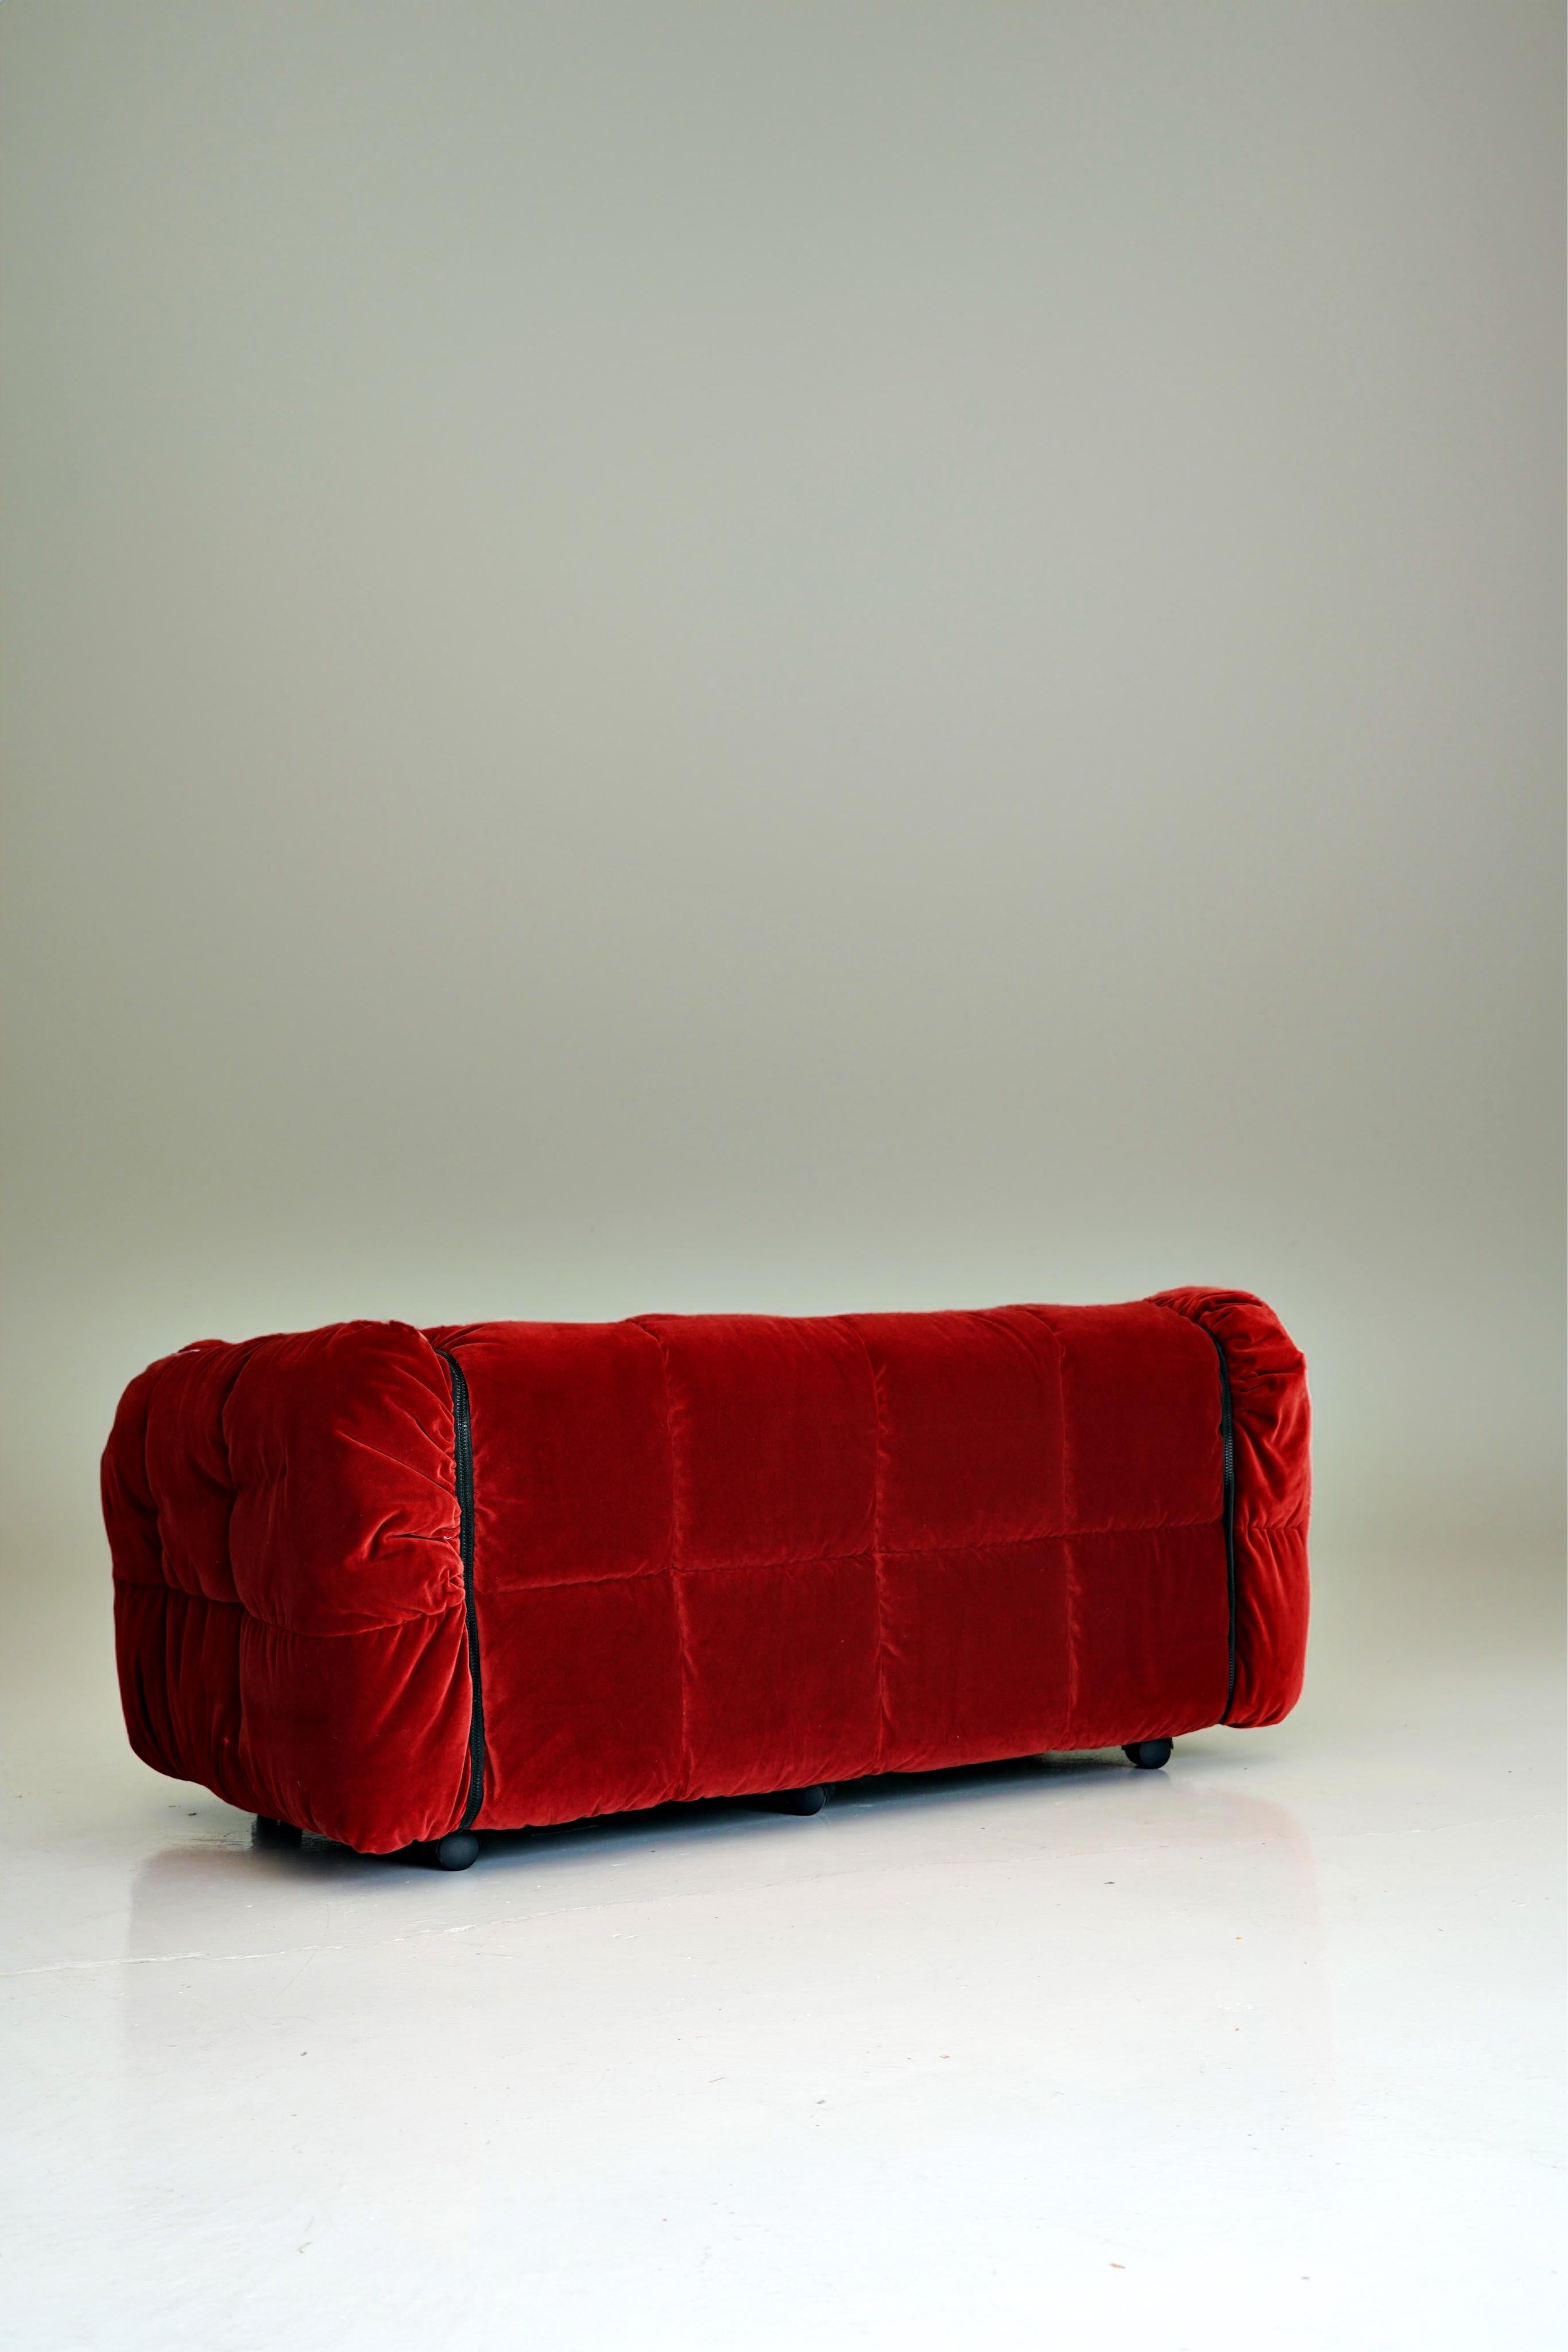 20th Century Strips Sofa - 2 seater with arms, Cini Boeri, Arflex. Pair available. For Sale